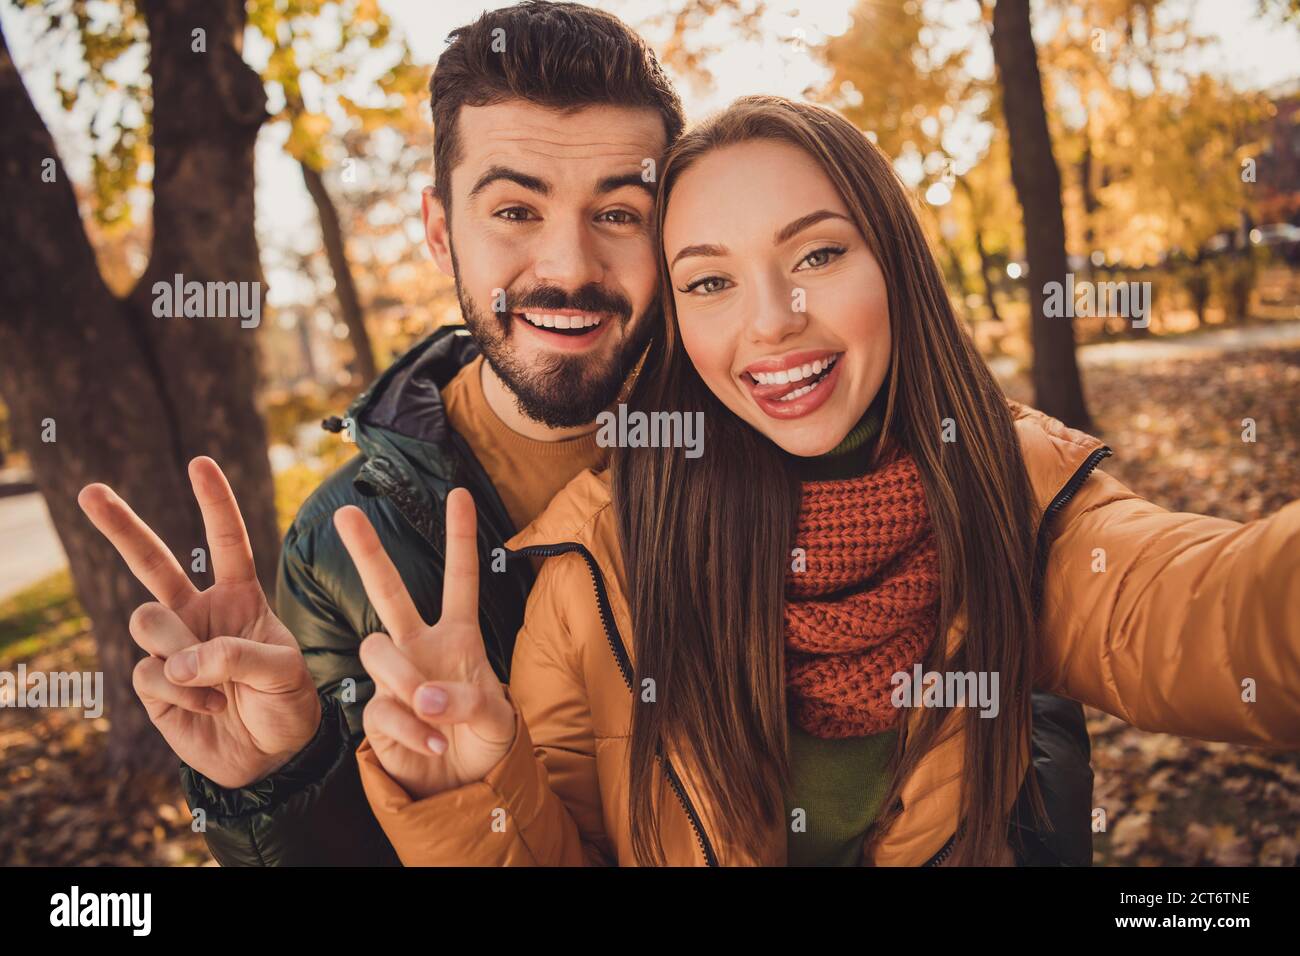 portrait of positive two people students couple take selfie make v sign symbol show tongue out in autumn park 2CT6TNE